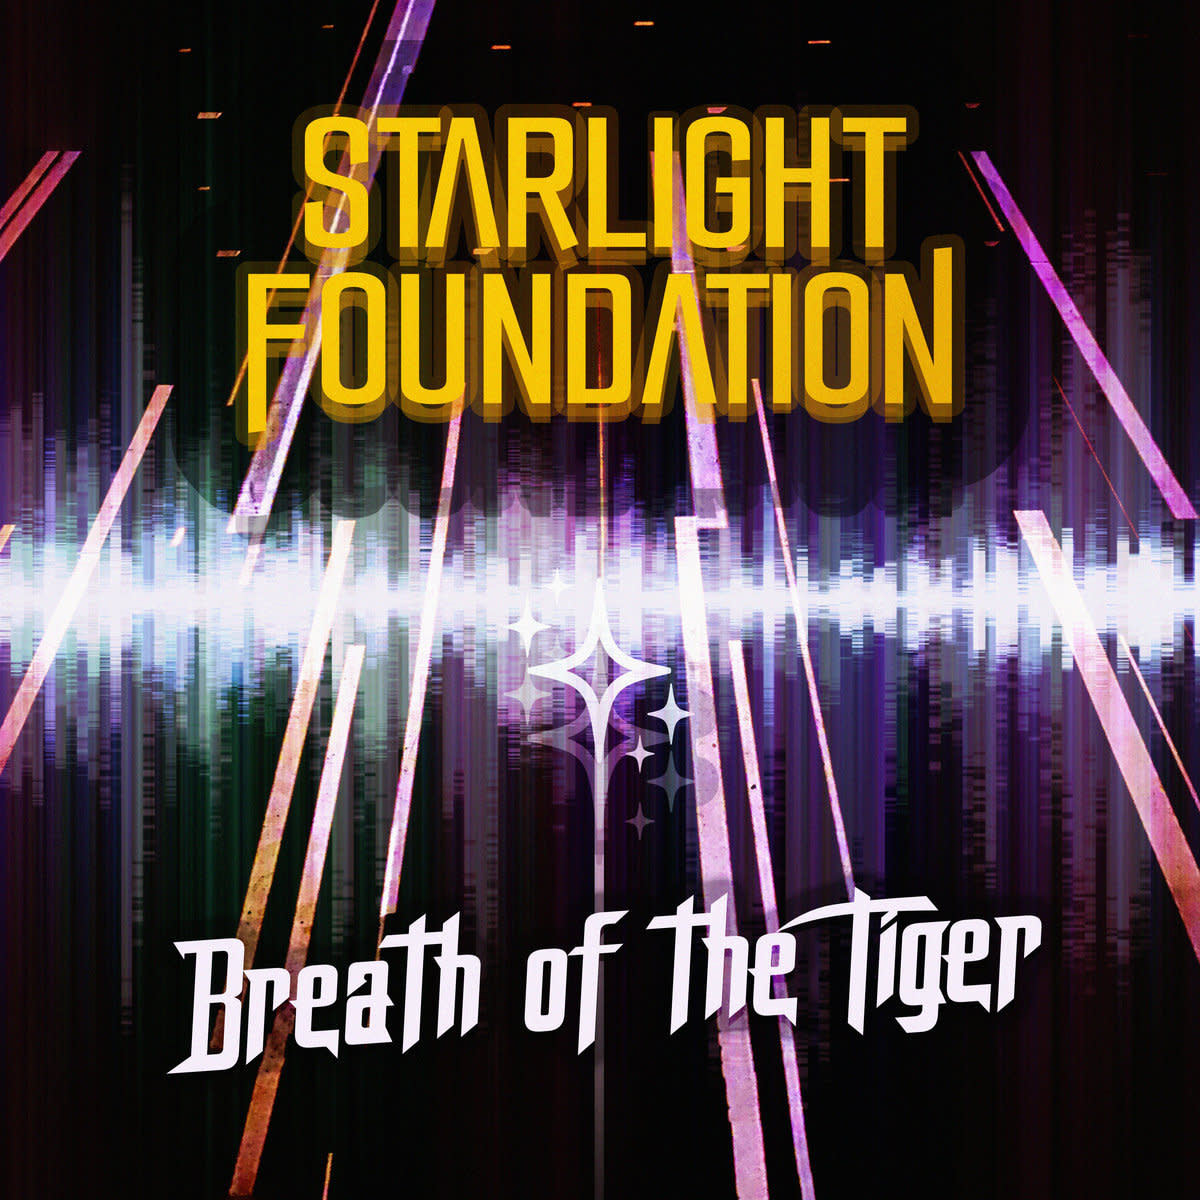 synth-single-review-breath-of-the-tiger-by-starlight-foundation